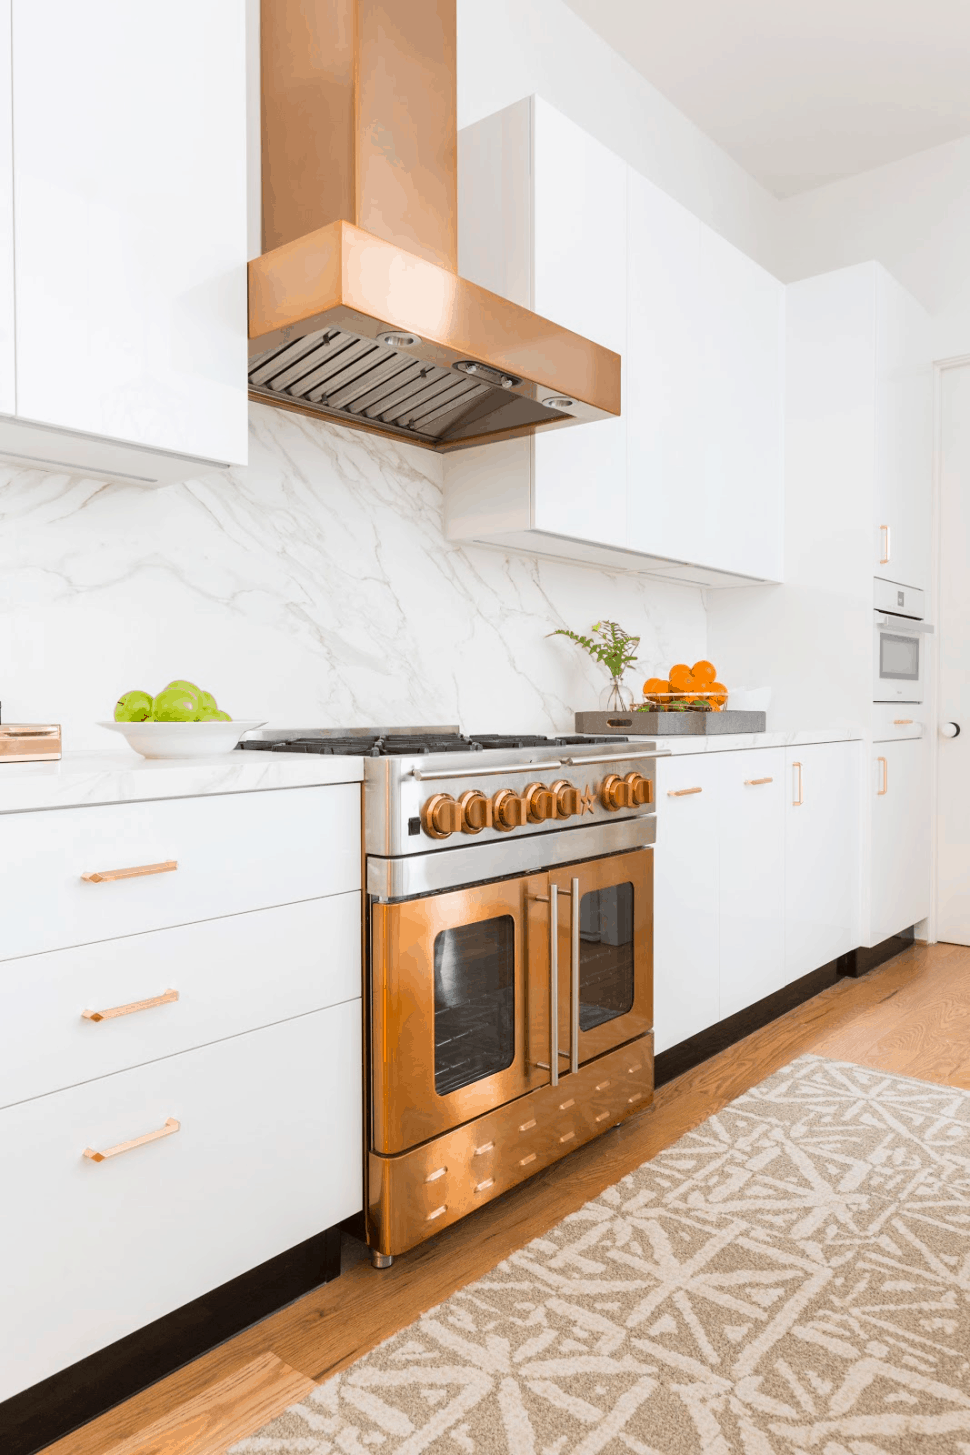 Copper and white kitchen with copper venthood and drawer pulls - Laura U Interior Design